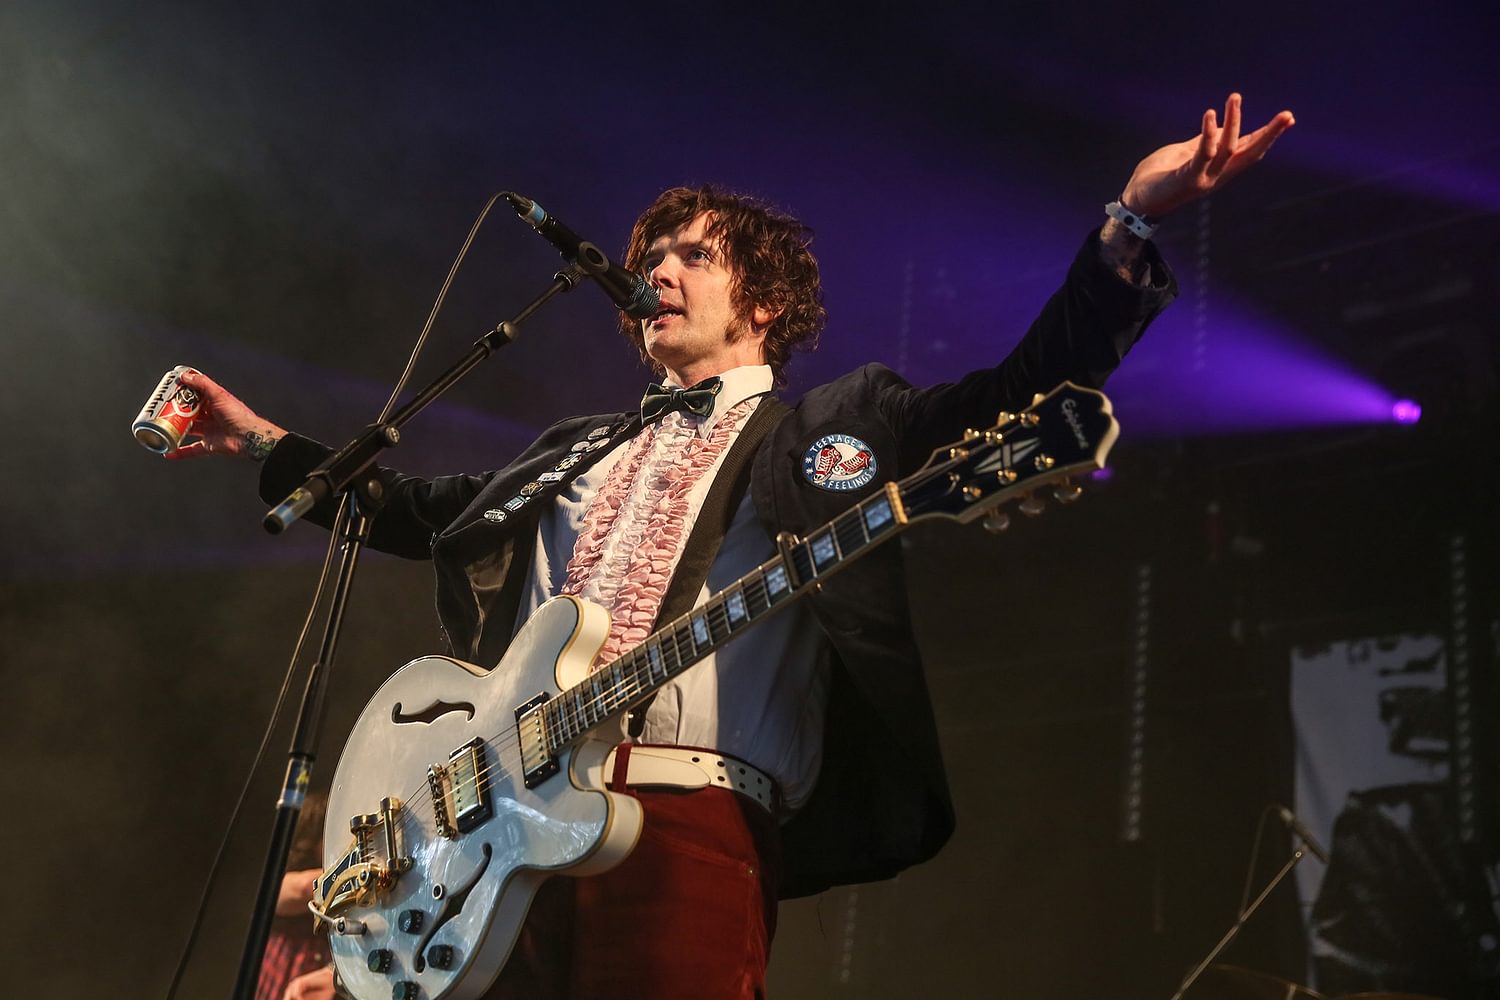 Beach Slang, The Hives and more added to BST Hyde Park line-up